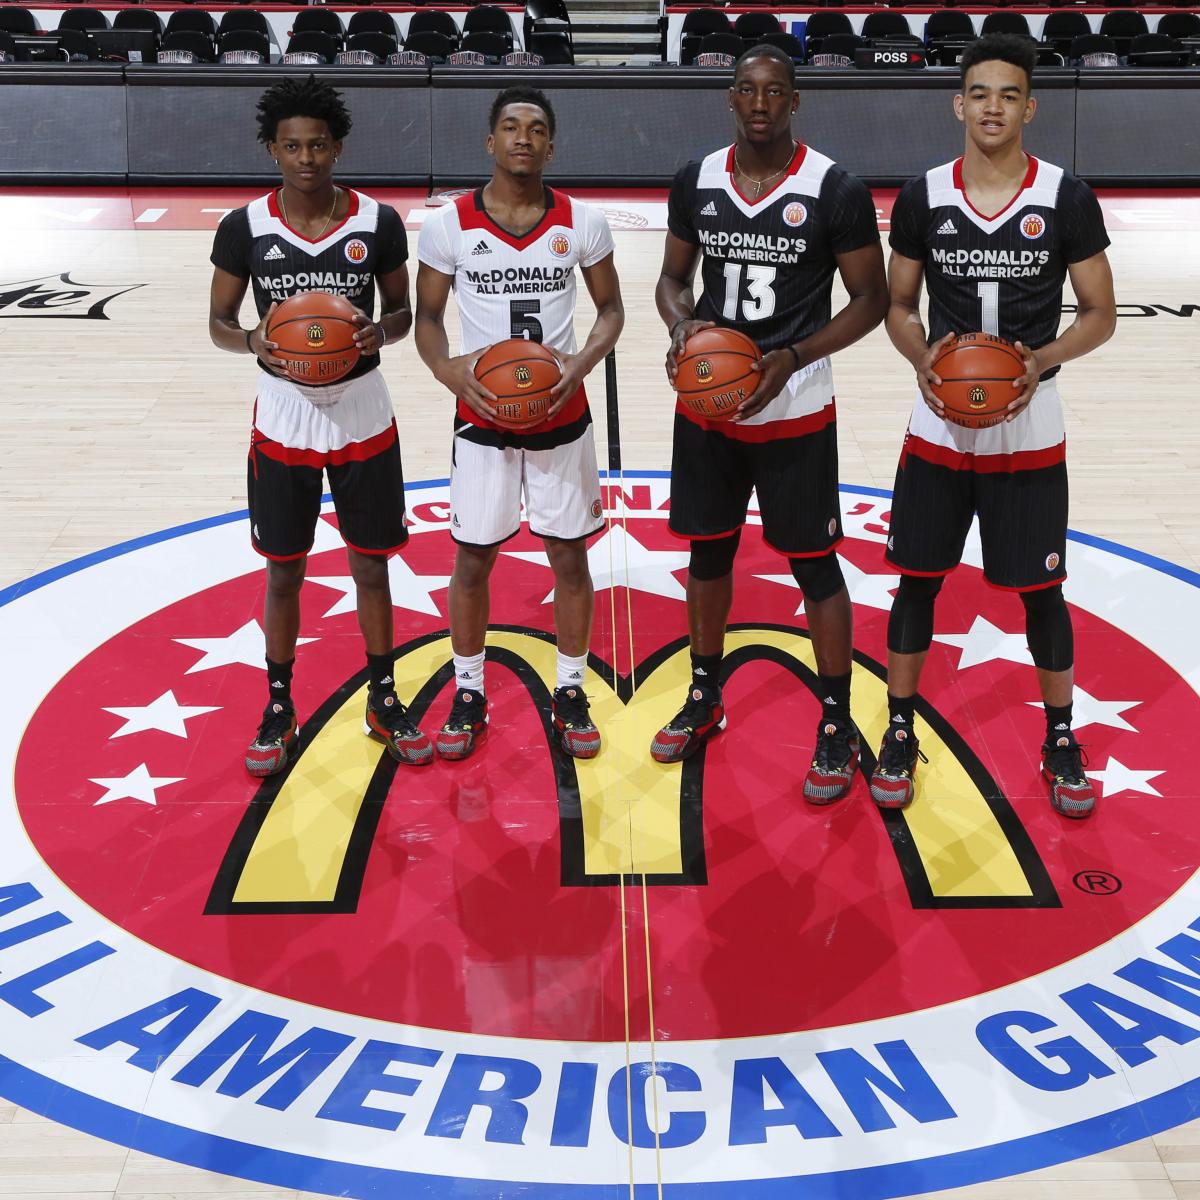 McDonald's AllAmerican Game 2016 Live Score, Stats and Highlights